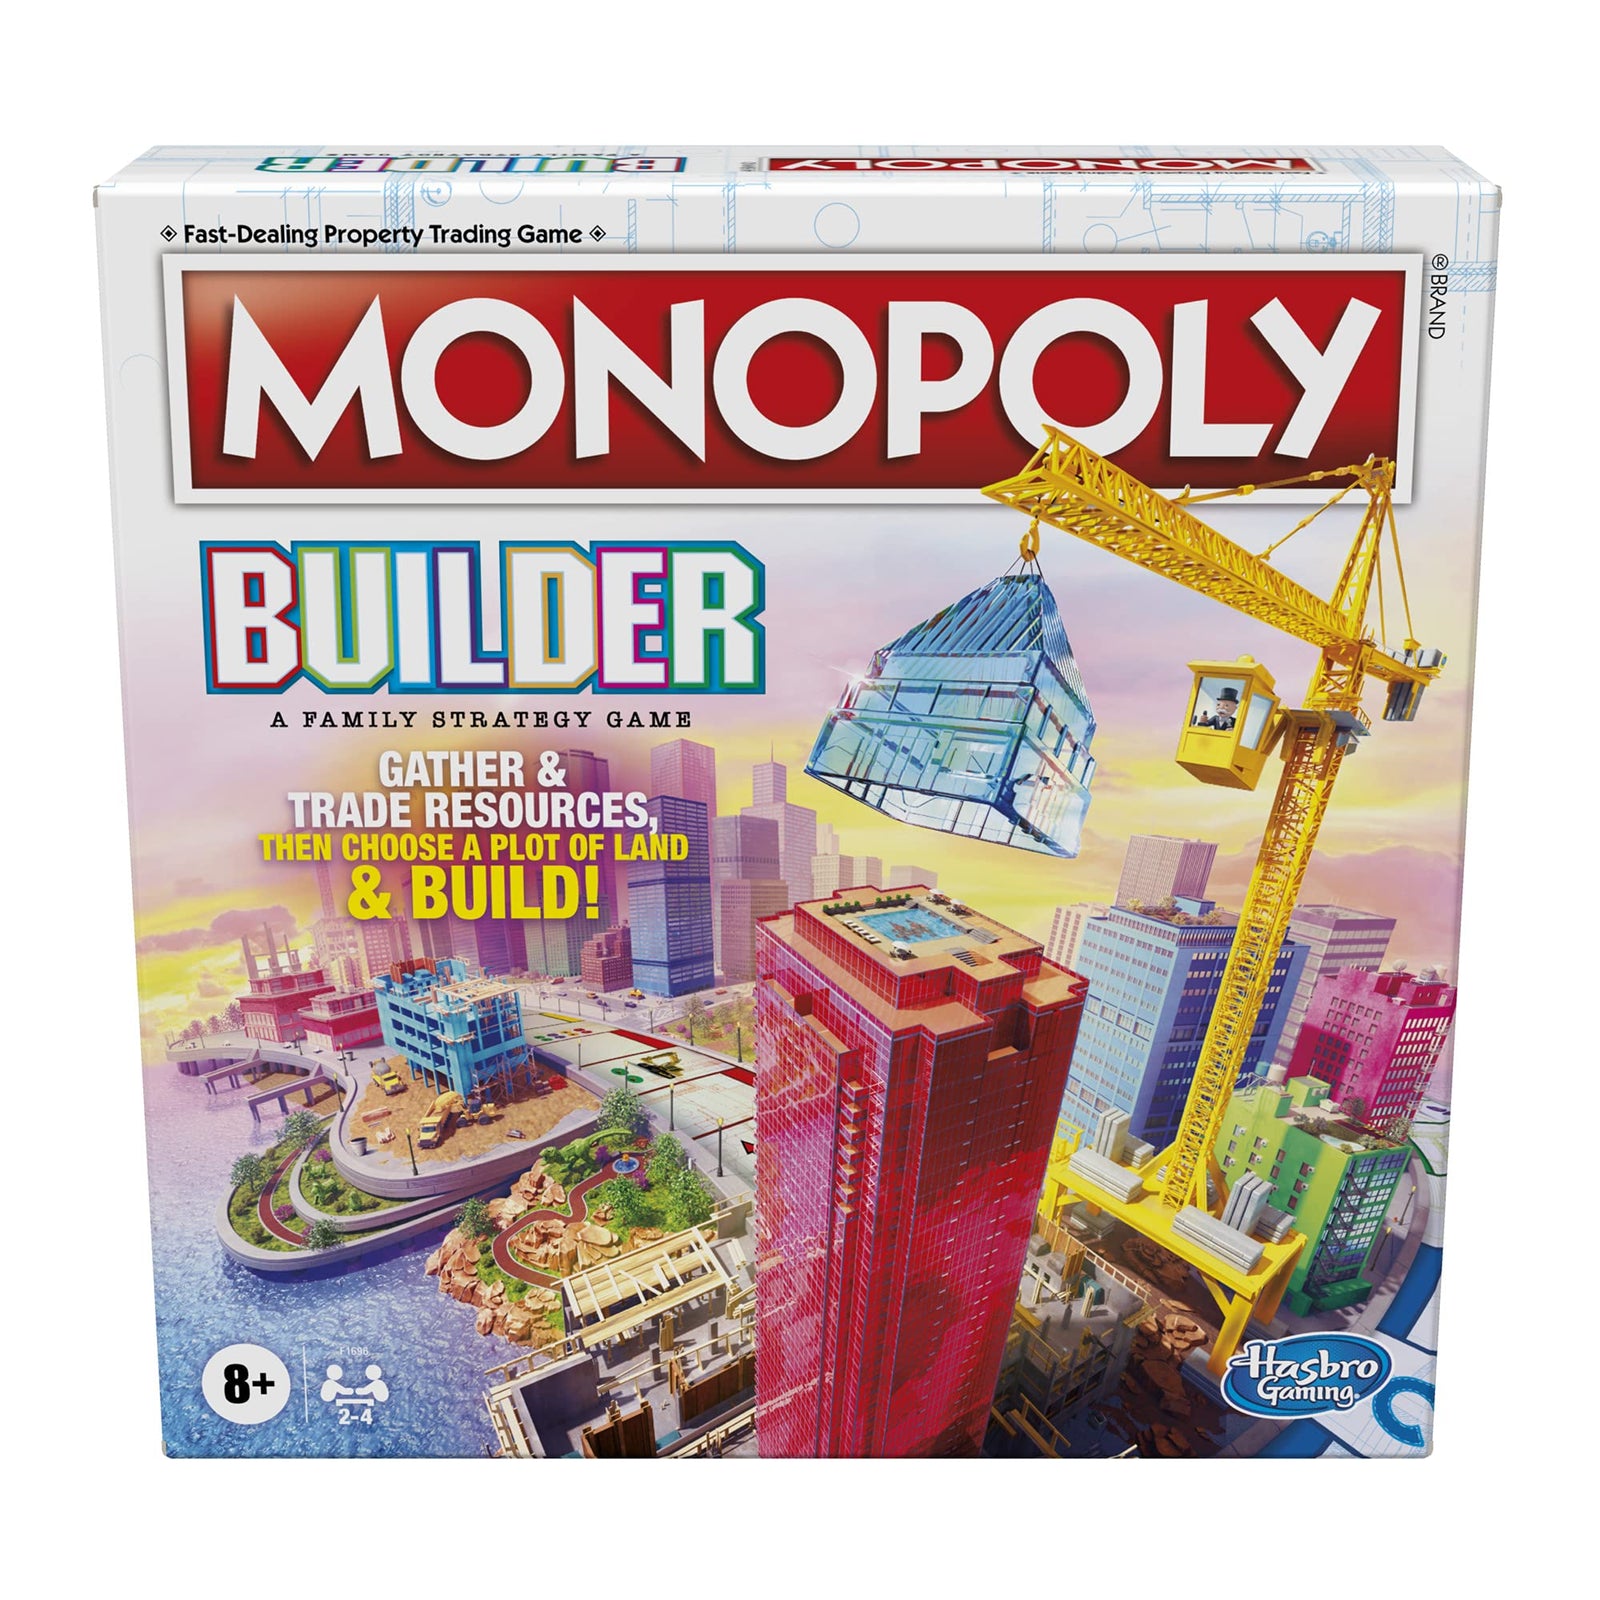 Monopoly Builder Board Game, Strategy Game, Family Game, Games for Kids, Fun Game to Play, Family Board Games, Ages 8 and up